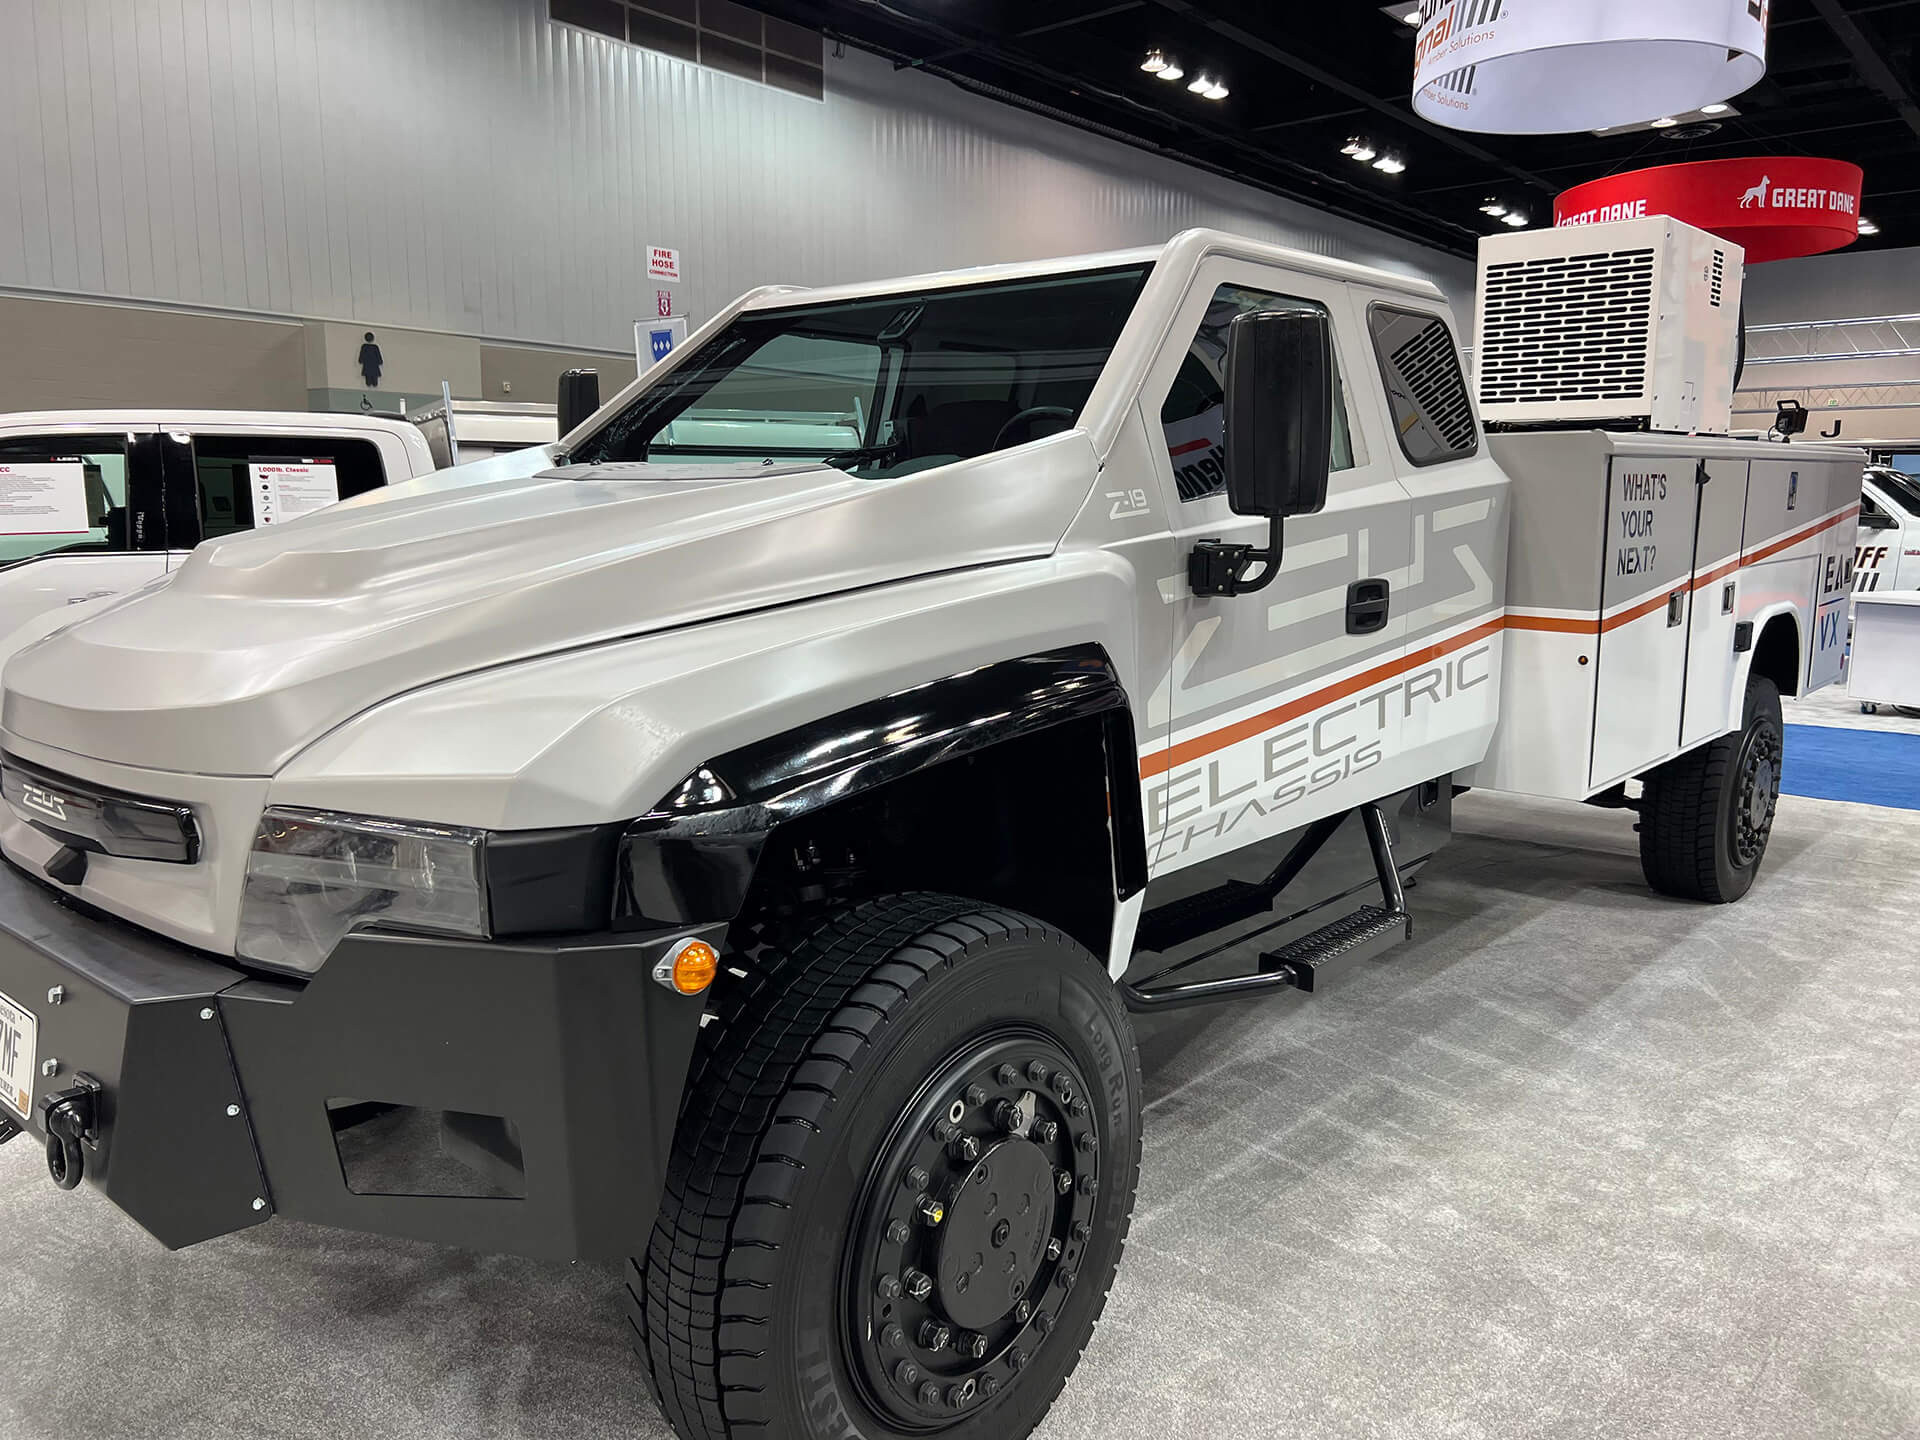 Zeus Electric Chassis & EAVX / Reading Truck Bring Electrifying